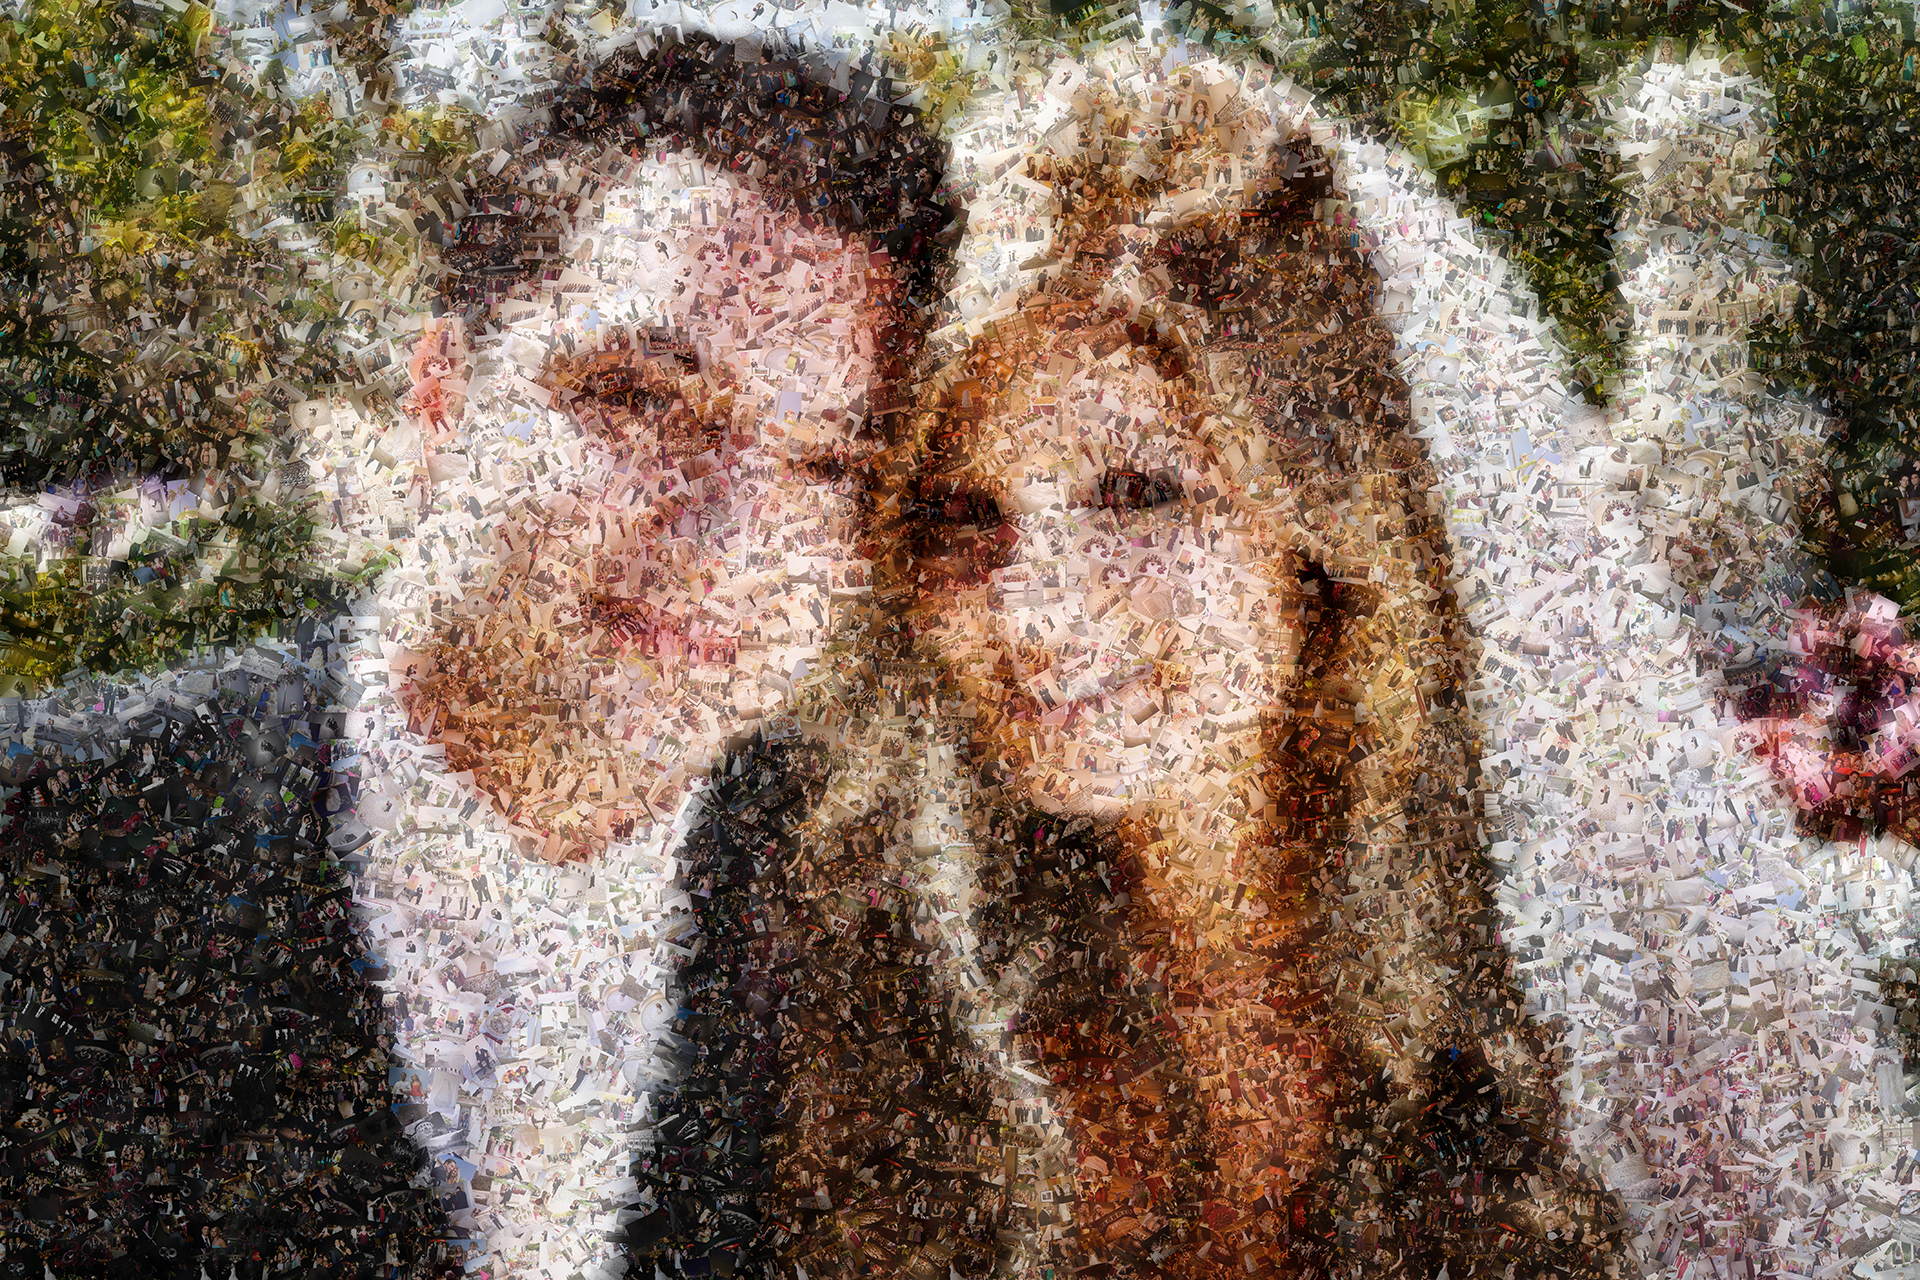 photo mosaic Using our new Scatter V.2 (Beta) technology, 1500 unique wedding photos selected by the photographer were arranged in a chaotic yet structured manor to create this vibrant mosaic